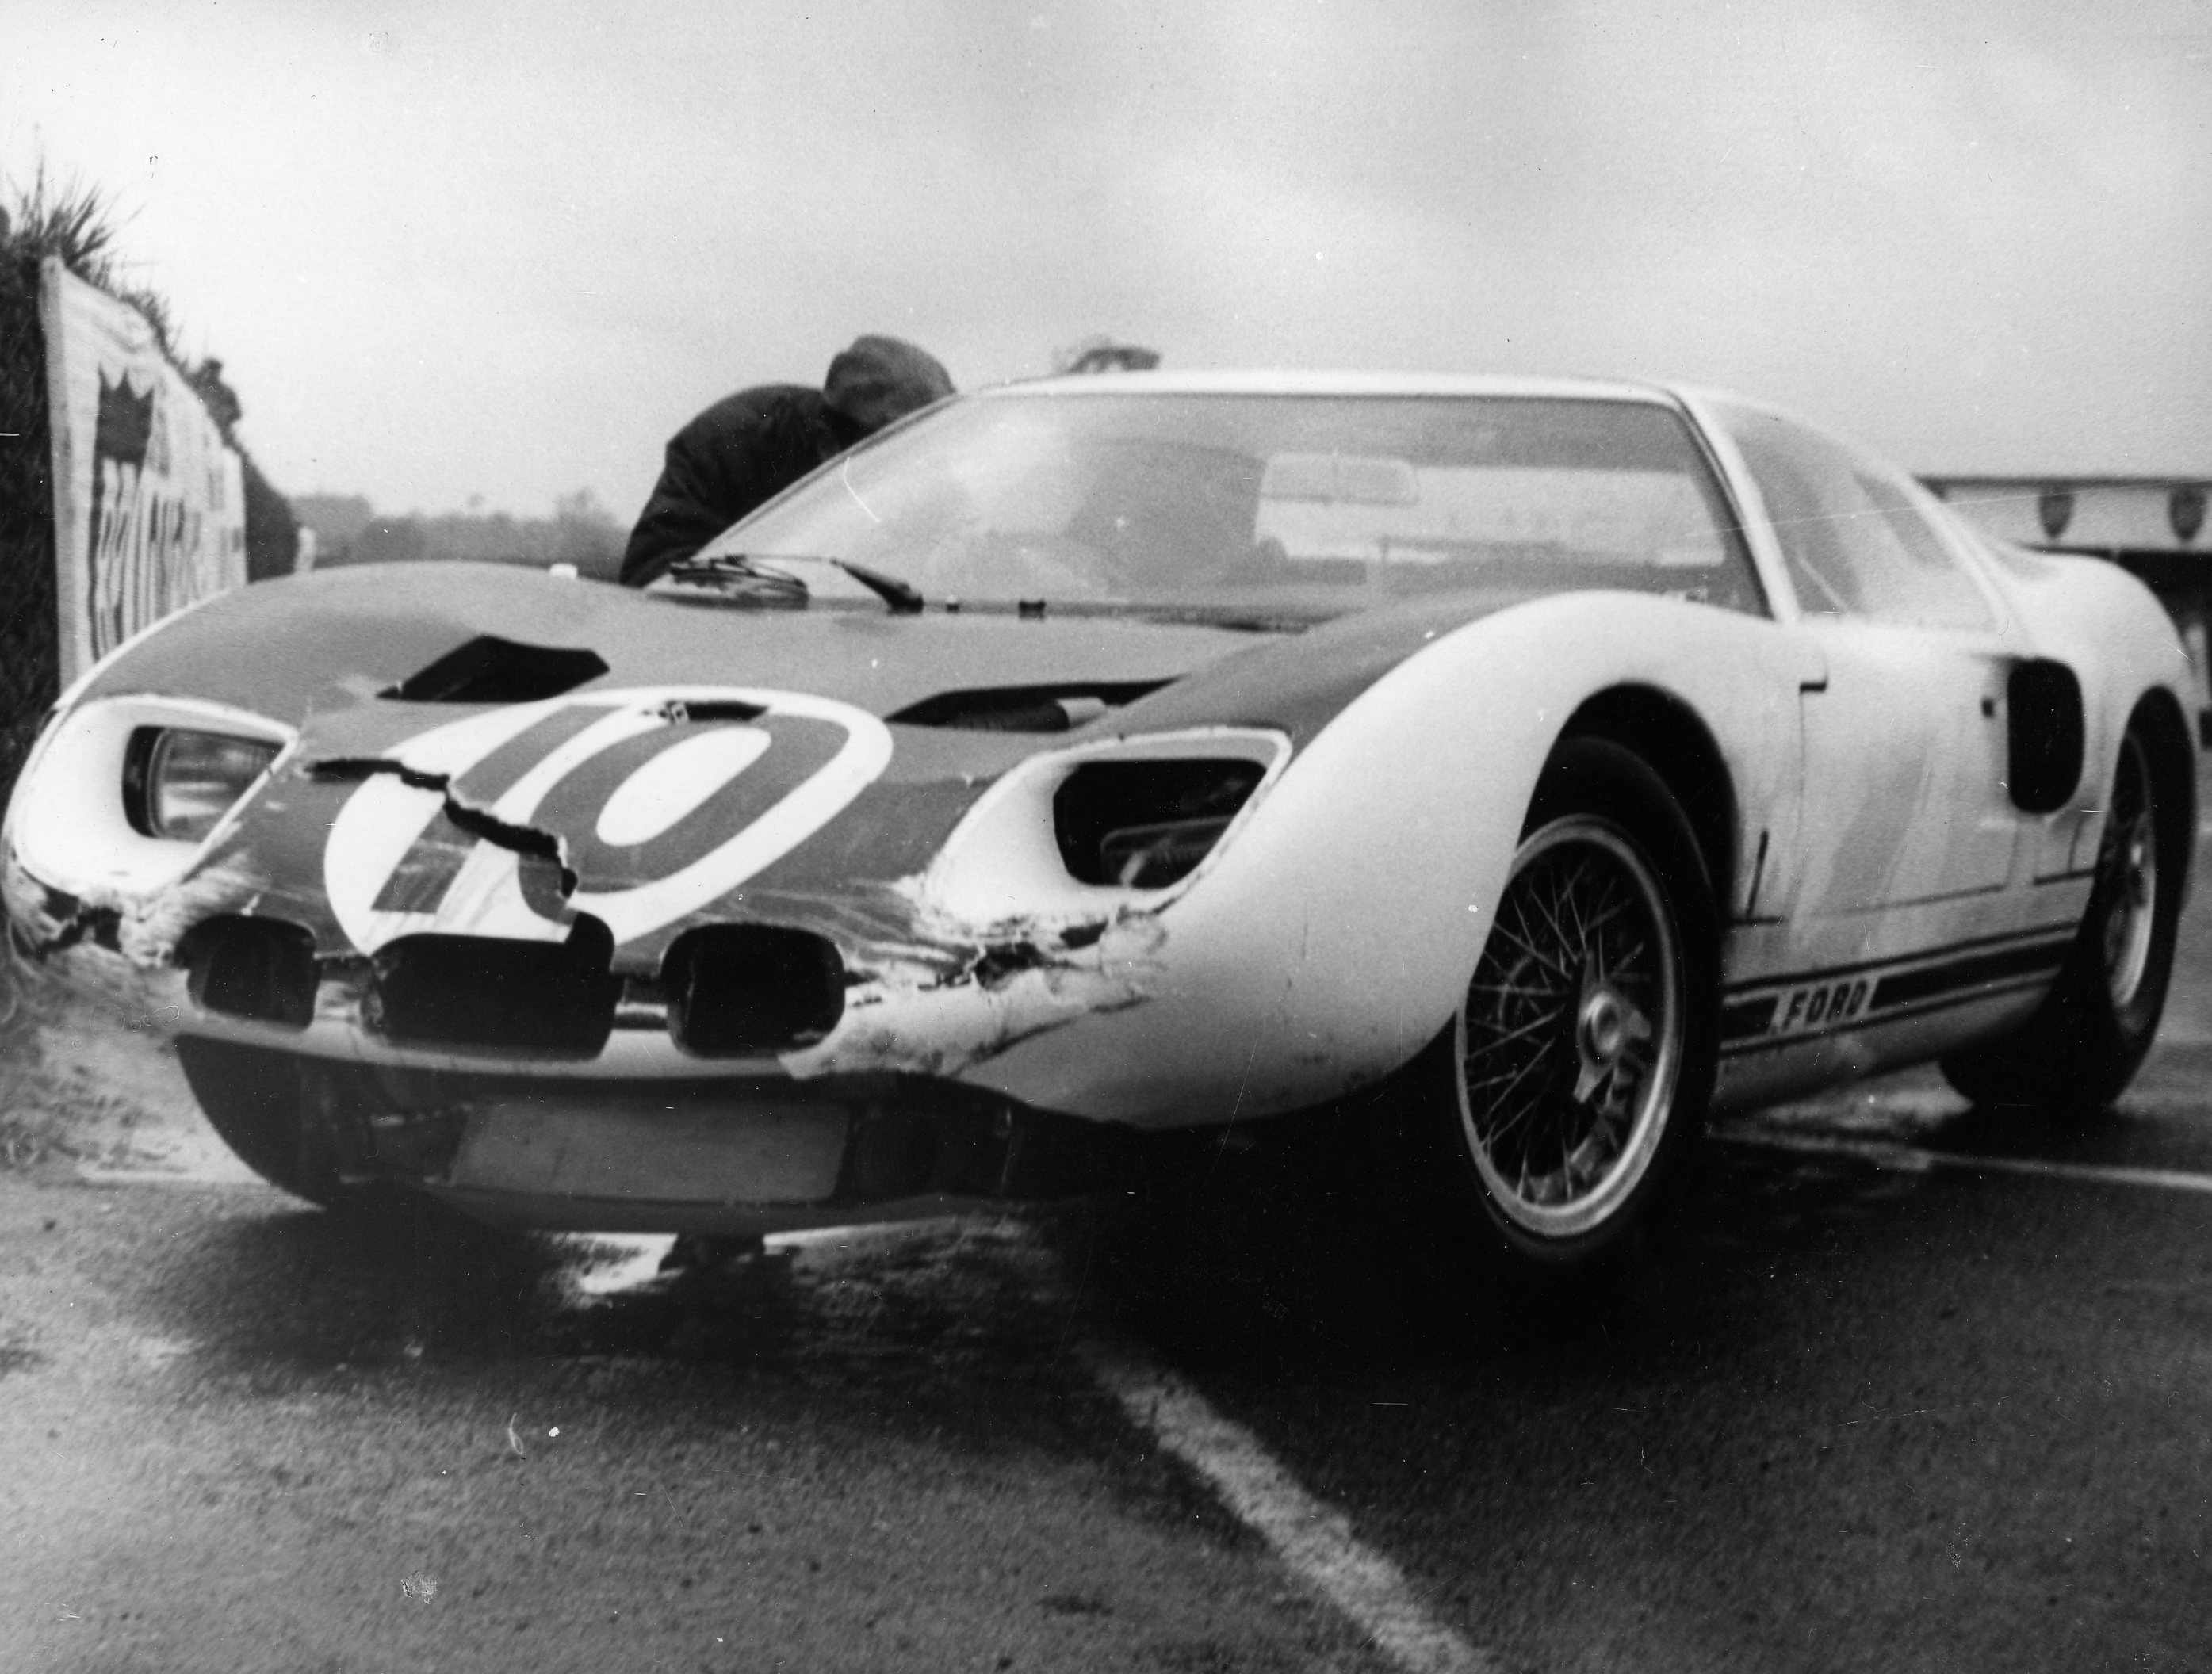 The 1964 Ford GT40 Mk.I failed to give the Ferraris a run for their money.